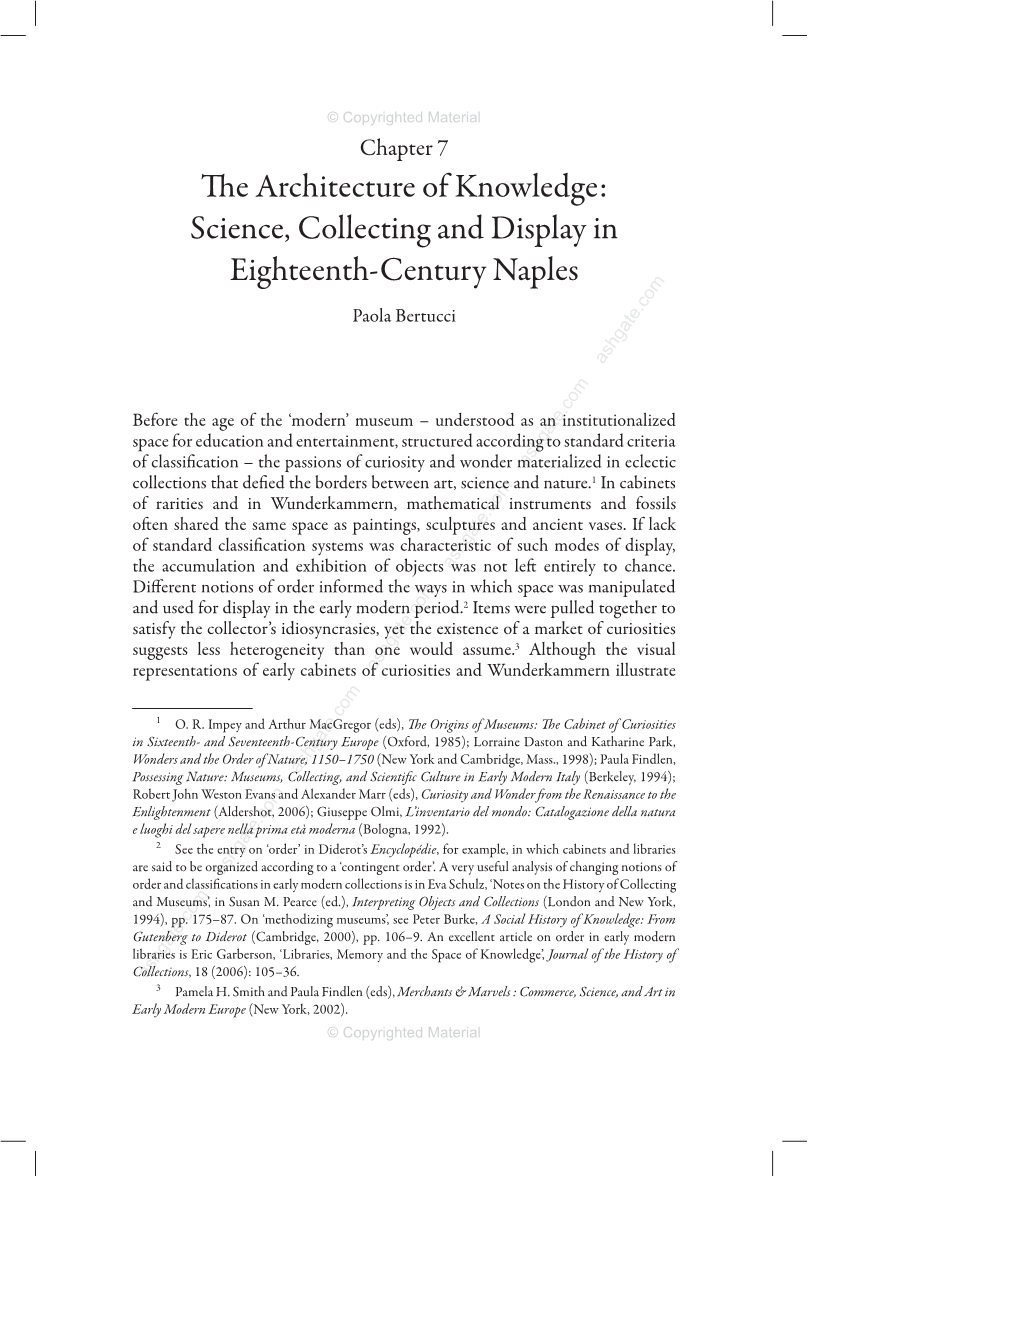 The Architecture of Knowledge: Science, Collecting and Display In